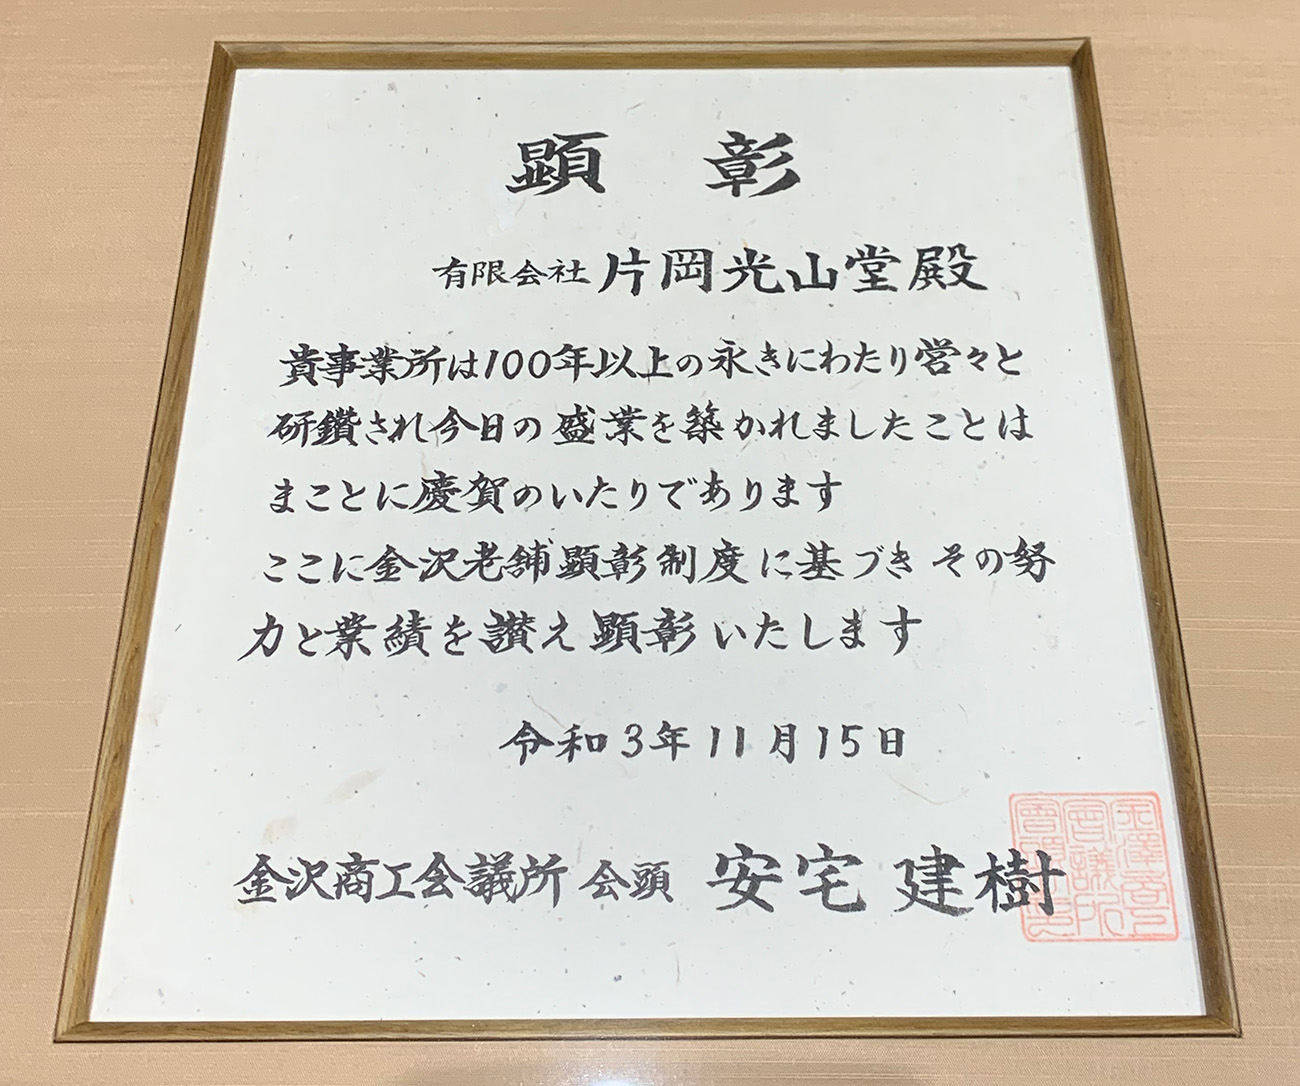 Image of the certificate for the long-established award